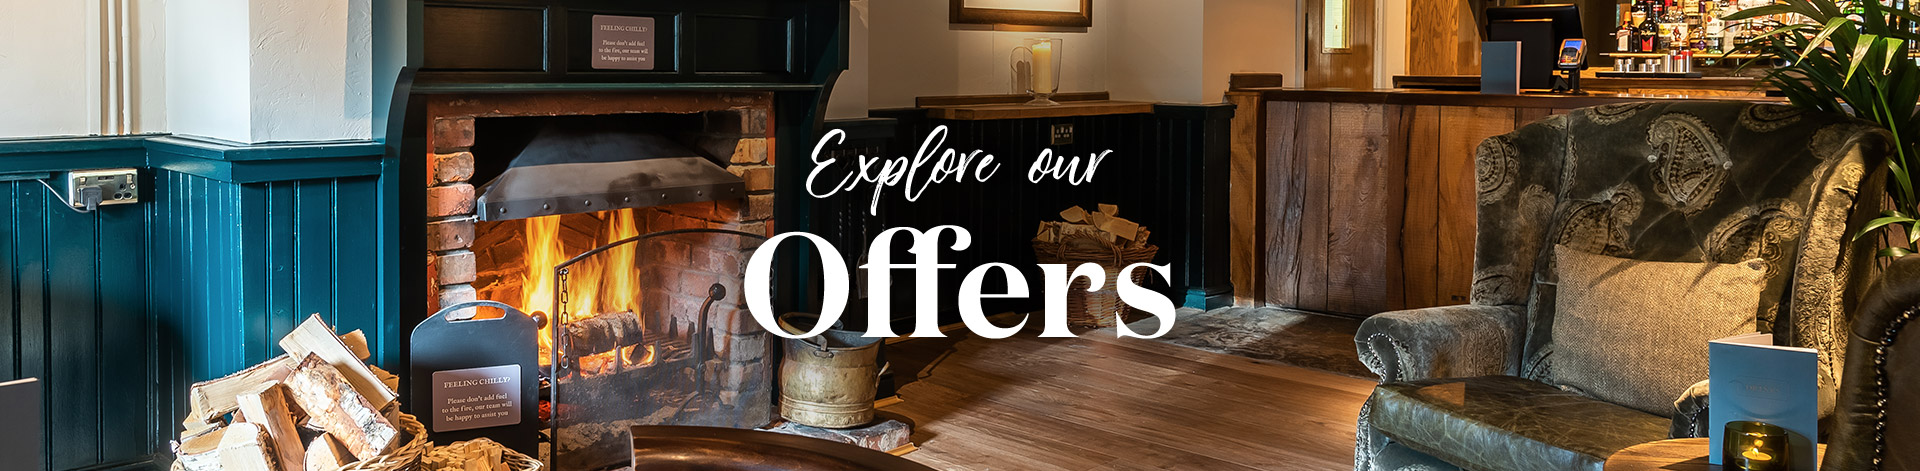 Our latest offers at The Firecrest